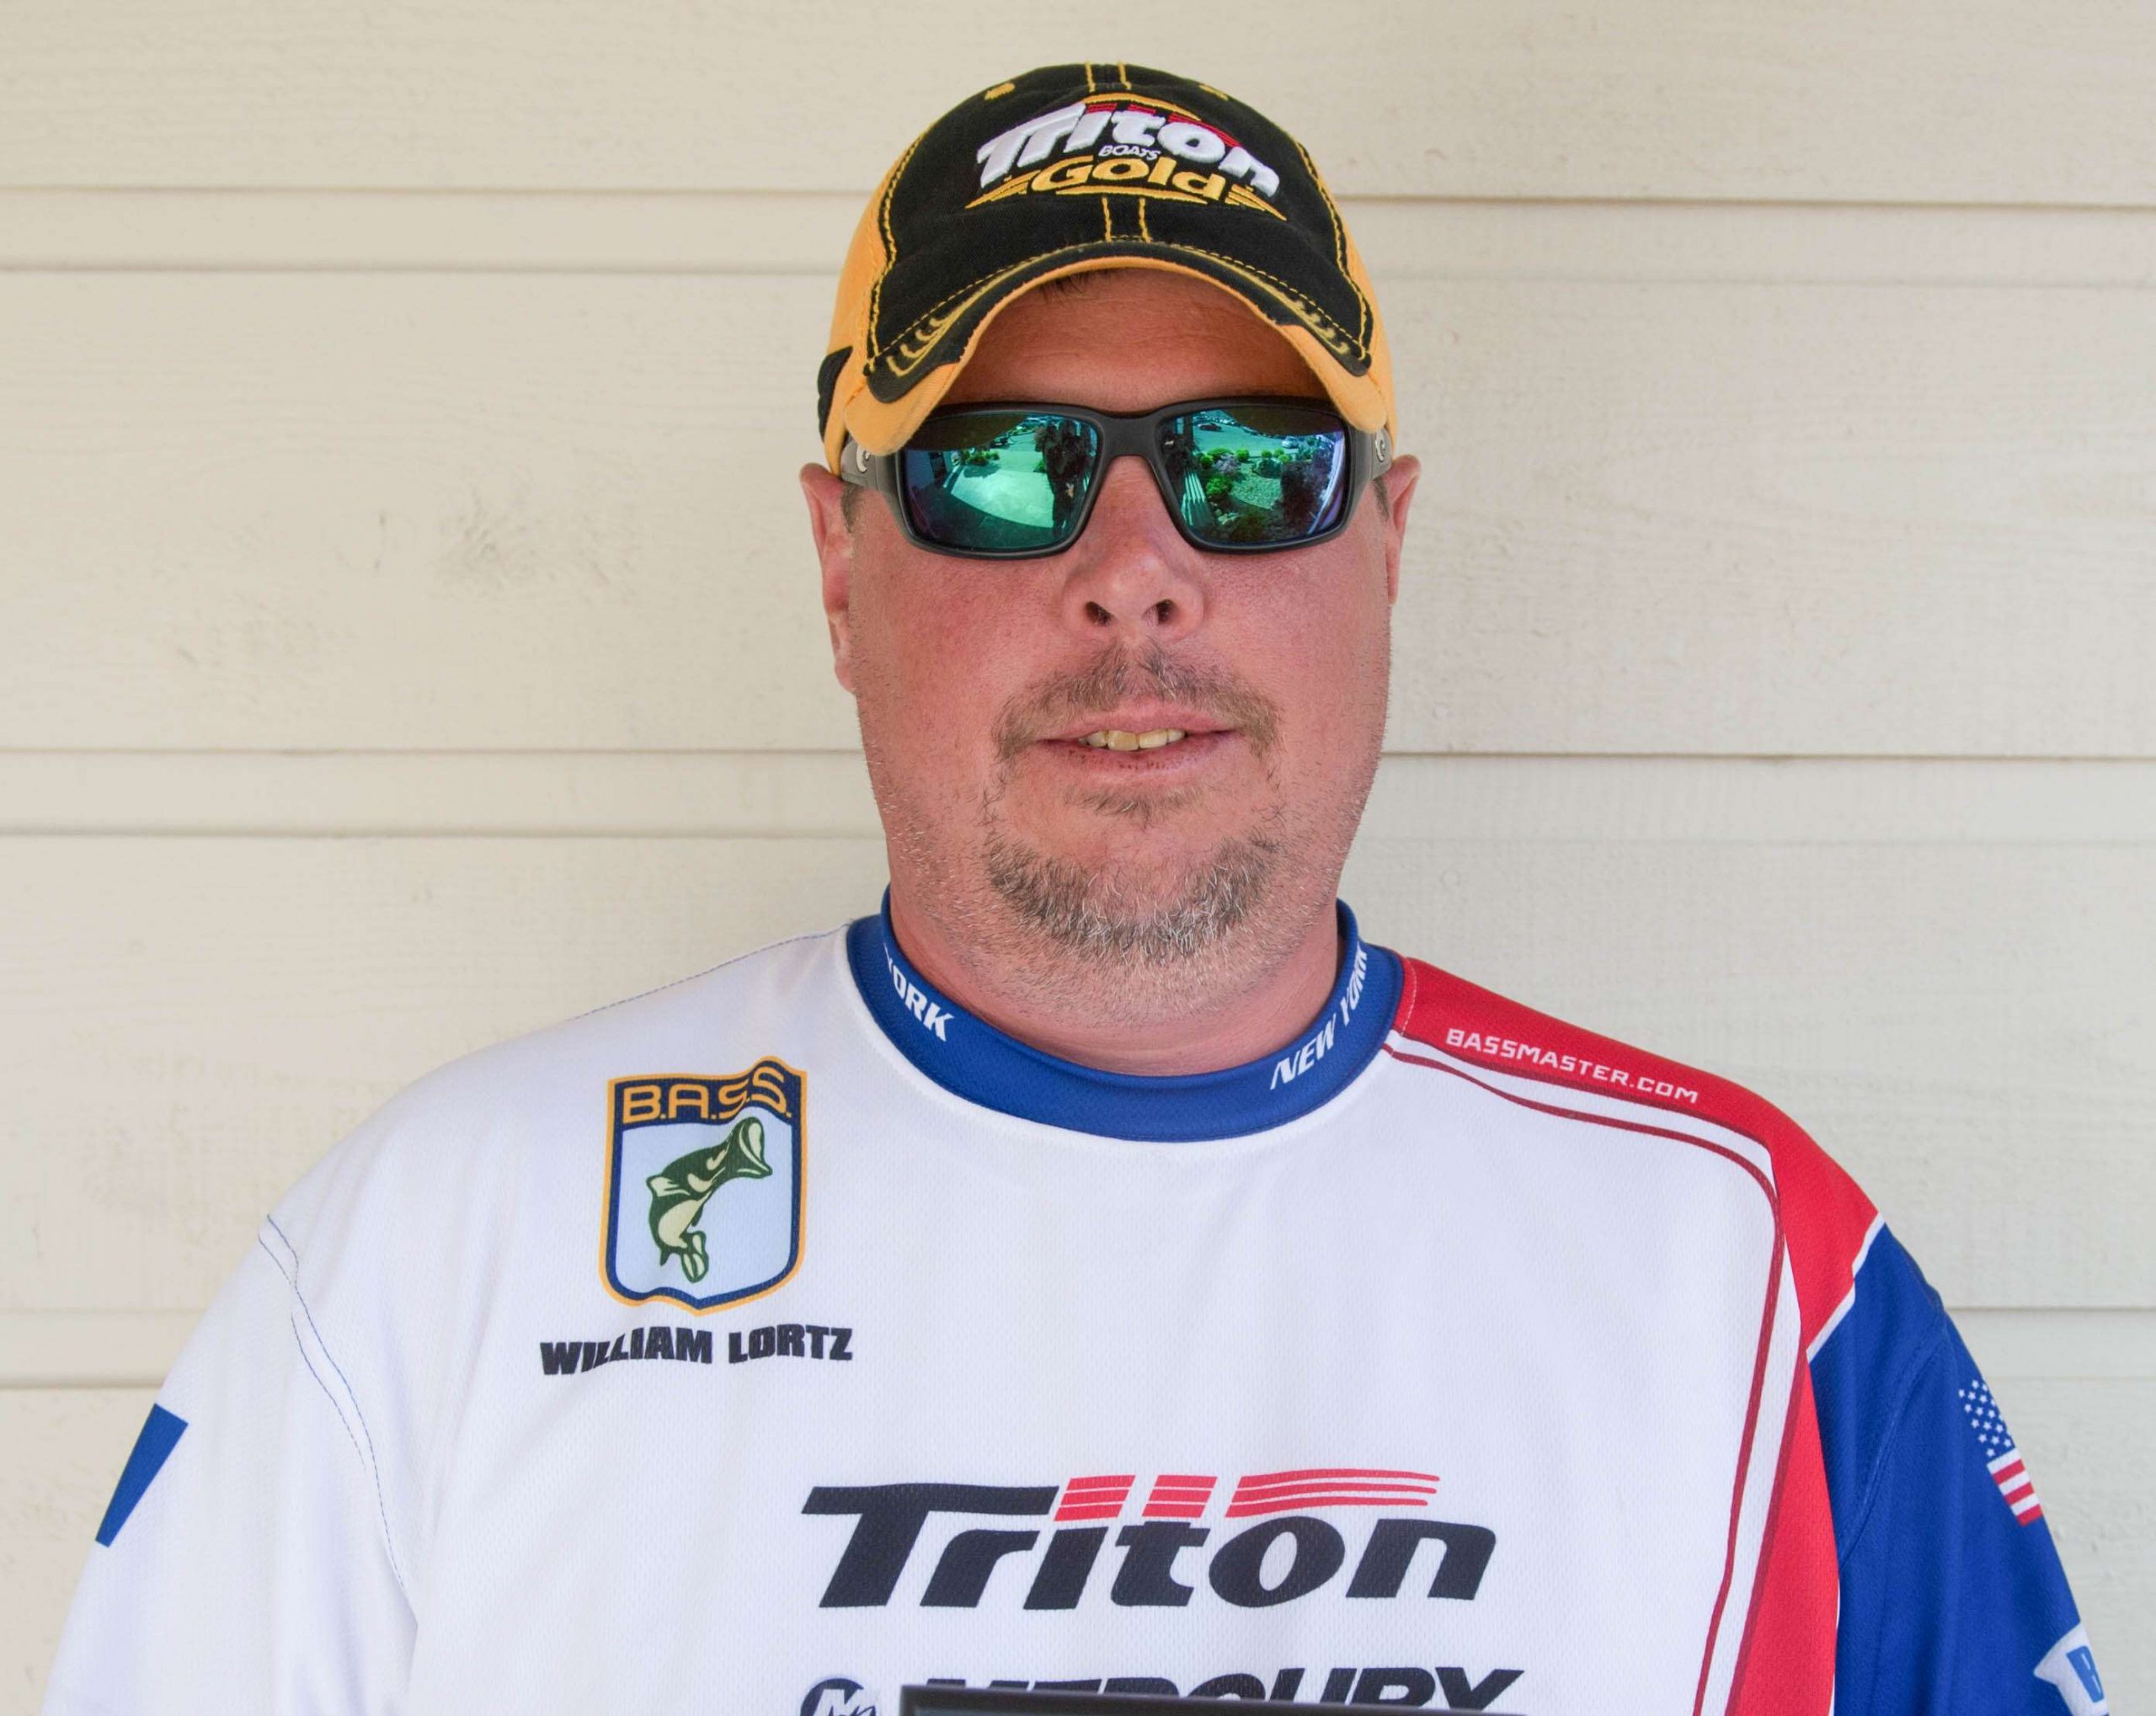 William Lortz II <br>
New York Boater <br>
William Lortz gets more time on the water than most of his Nation Championship competitors; heâs a bass fishing guide! And when heâs not guiding, heâs still doing whatever he can to be outdoors. Lortz, a member of the New York B.A.S.S. Nation, will be fishing his first championship. His sponsors are Triton, Mercury, TFO Rods, Under Armour, Sunline and Navionics. 